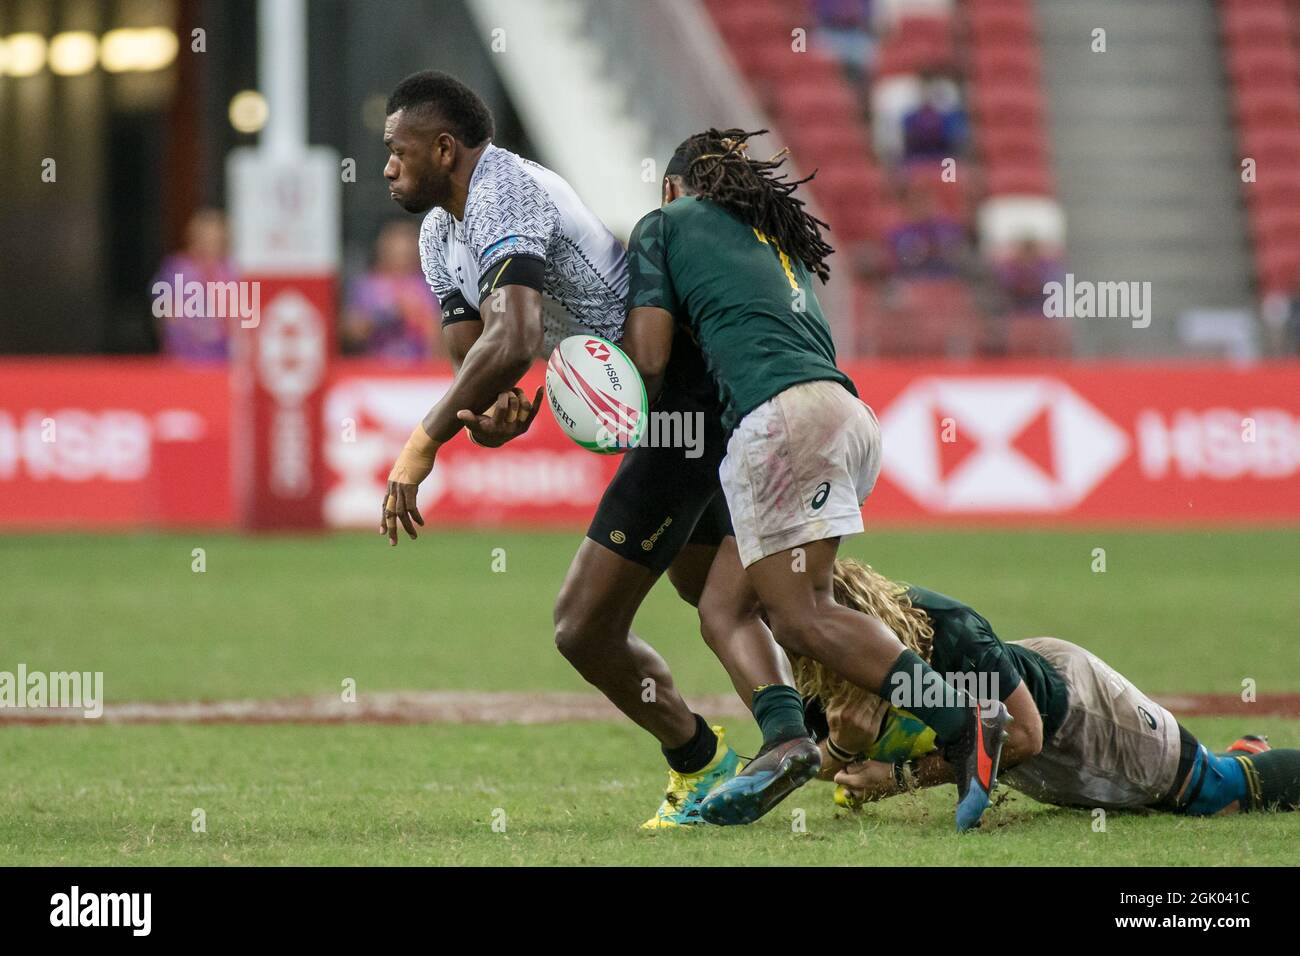 SINGAPORE-APRIL 14: South Africa 7s Team (green) plays against Fiji 7s team (white) during the Cup Final match of HSBC World Rugby Singapore Sevens on April 14, 2019 at National Stadium in Singapore Stock Photo